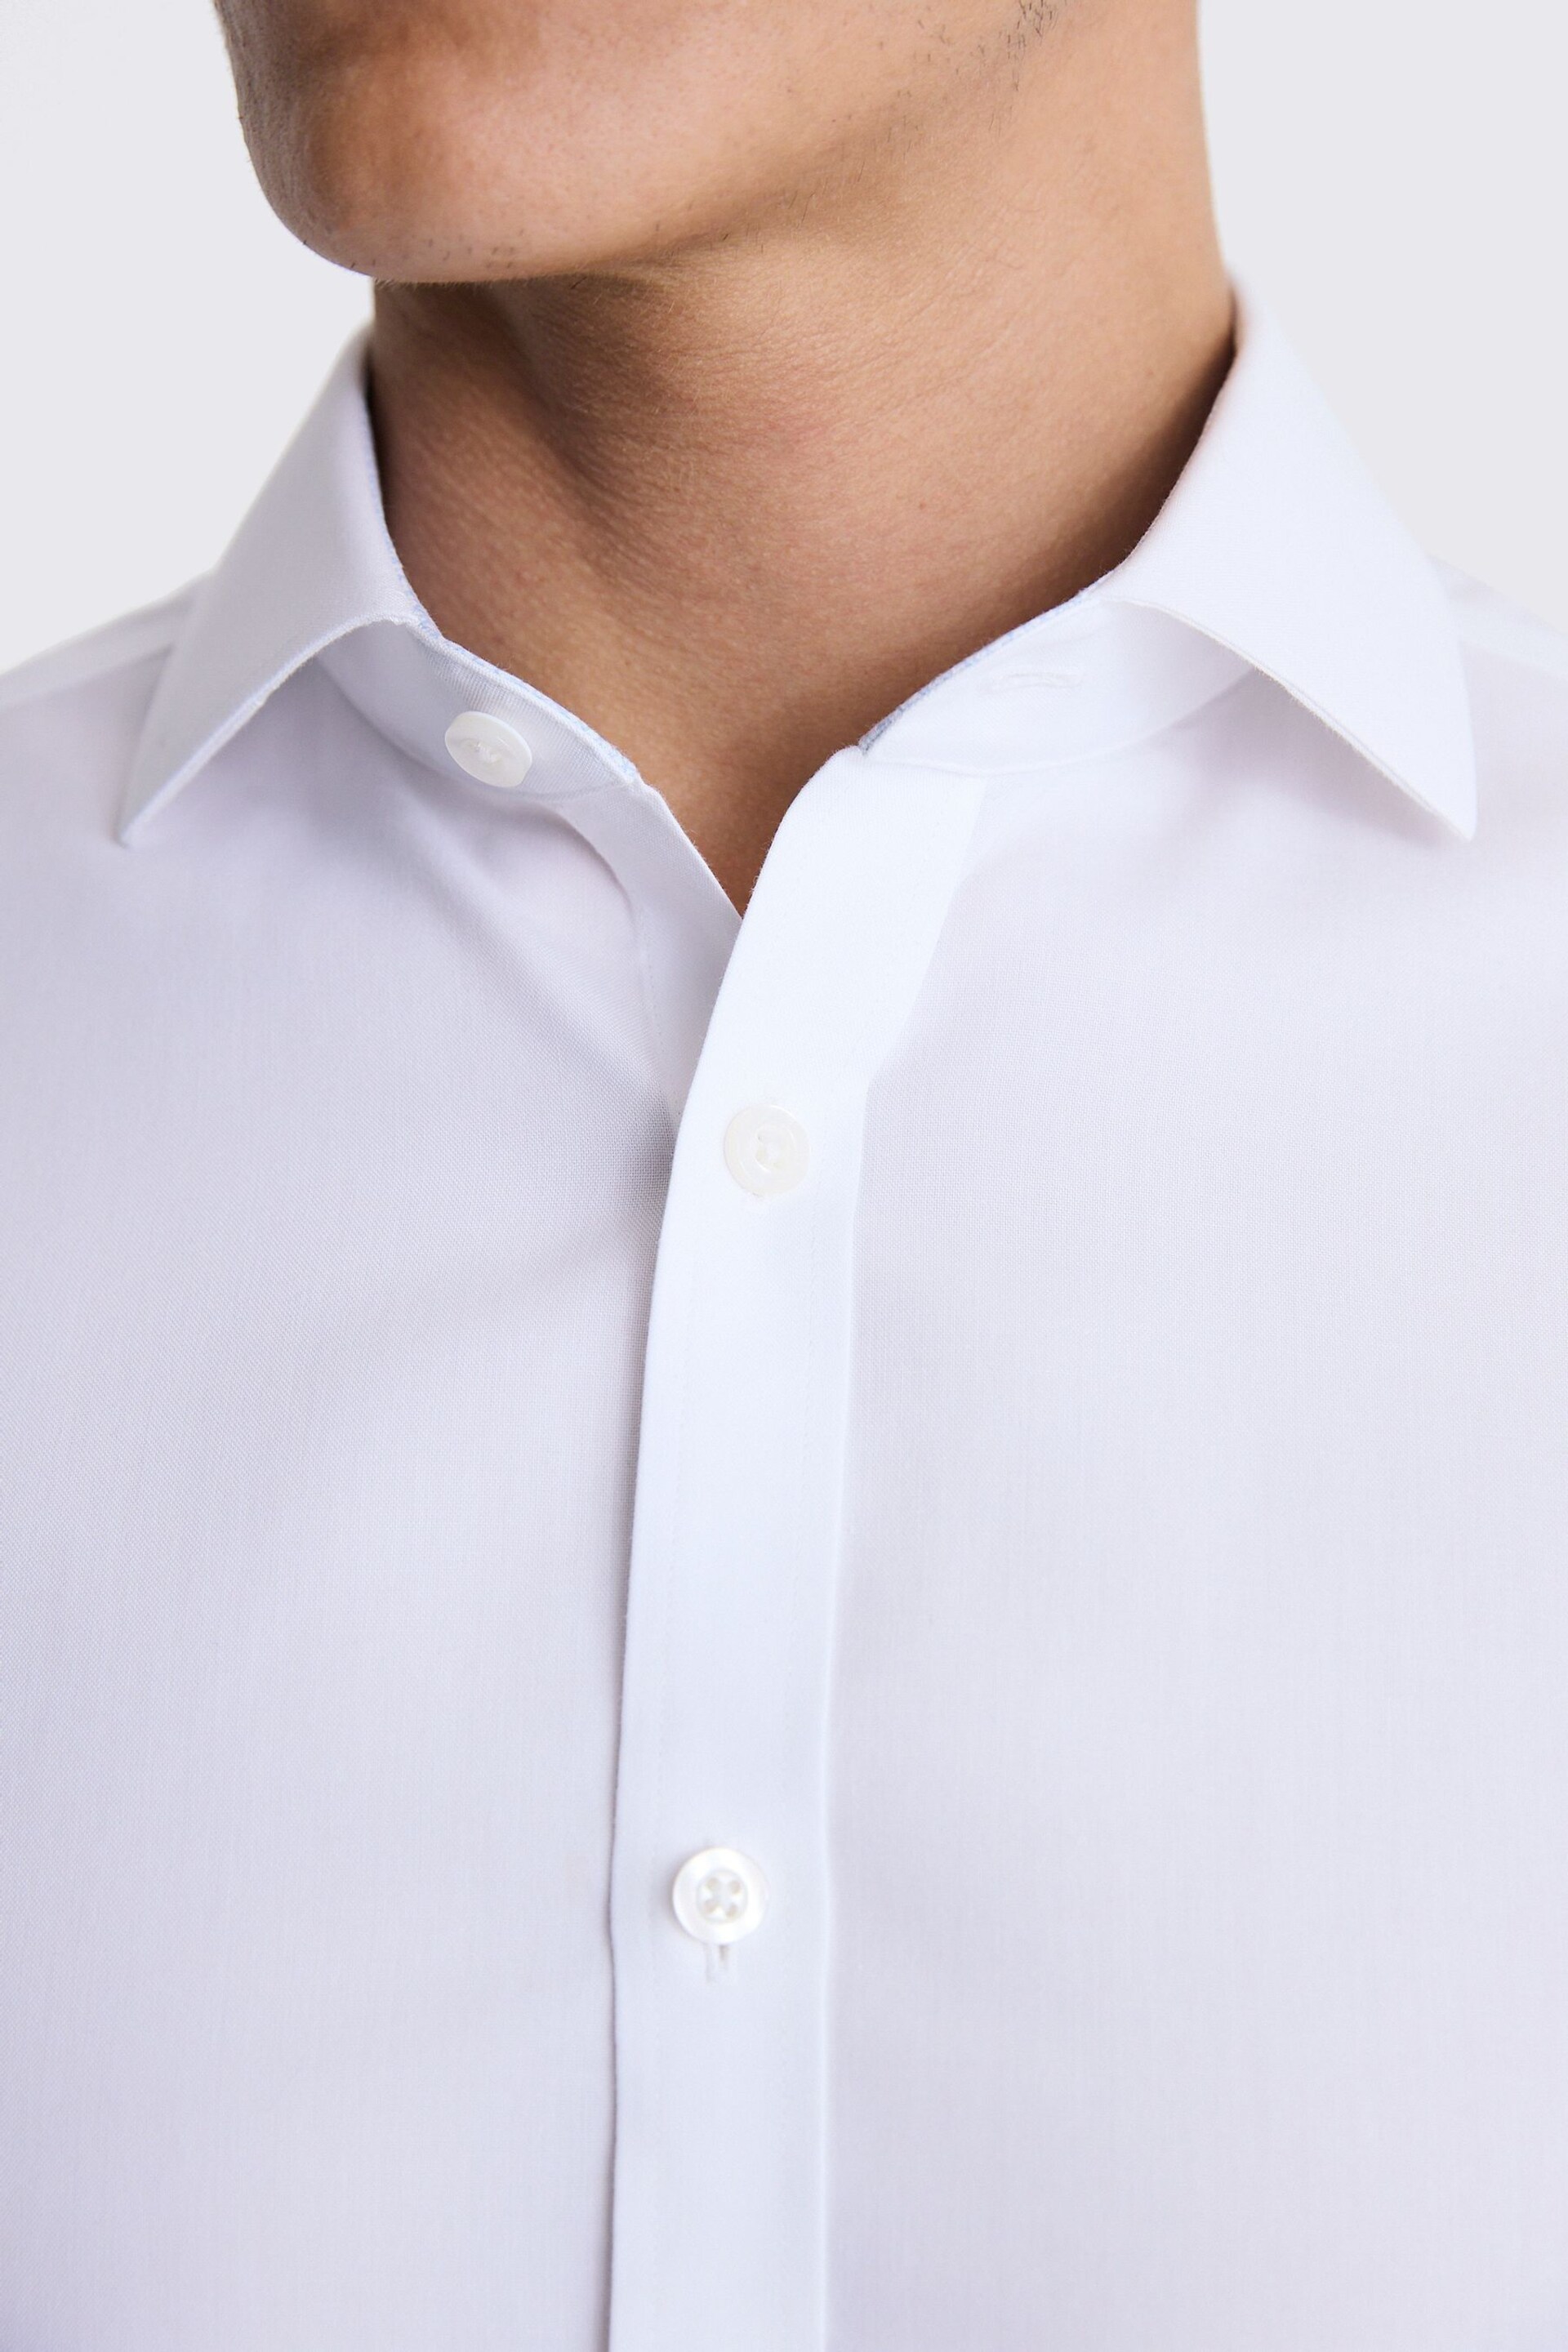 MOSS Tailored Fit Pinpoint Oxford Contrast Non Iron White Shirt - Image 3 of 3